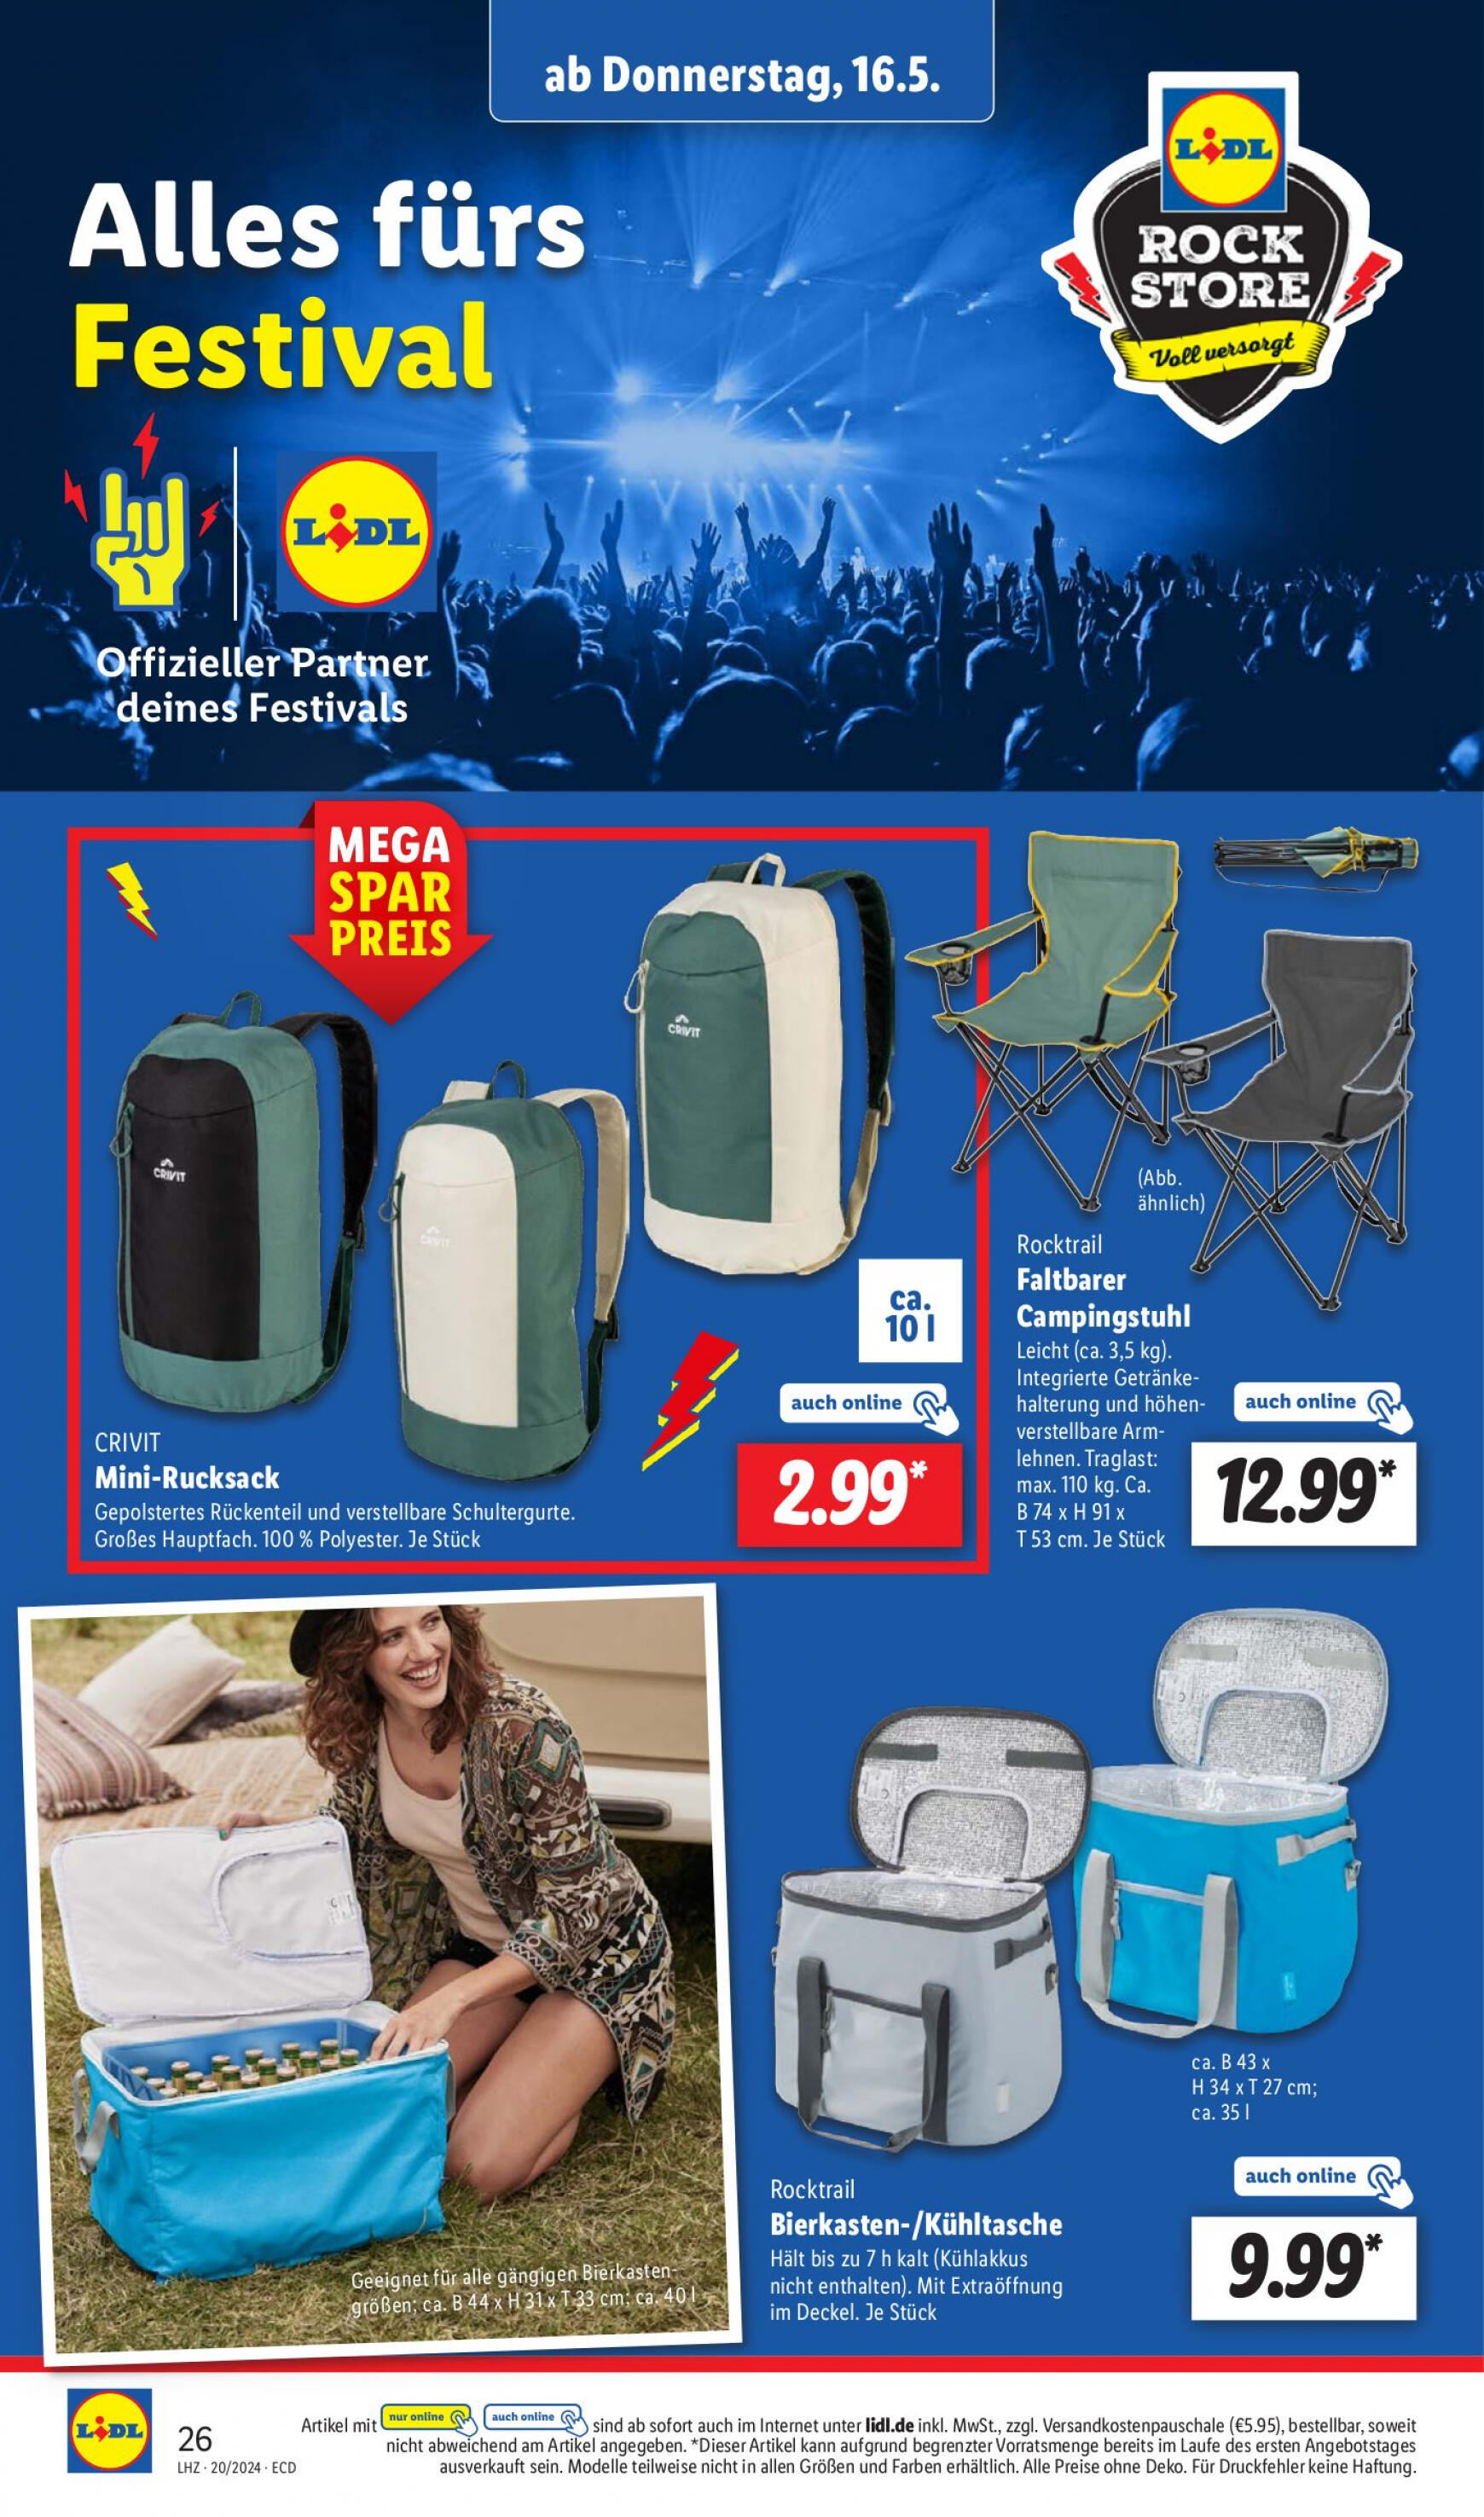 lidl - Flyer Lidl aktuell 13.05. - 18.05. - page: 32